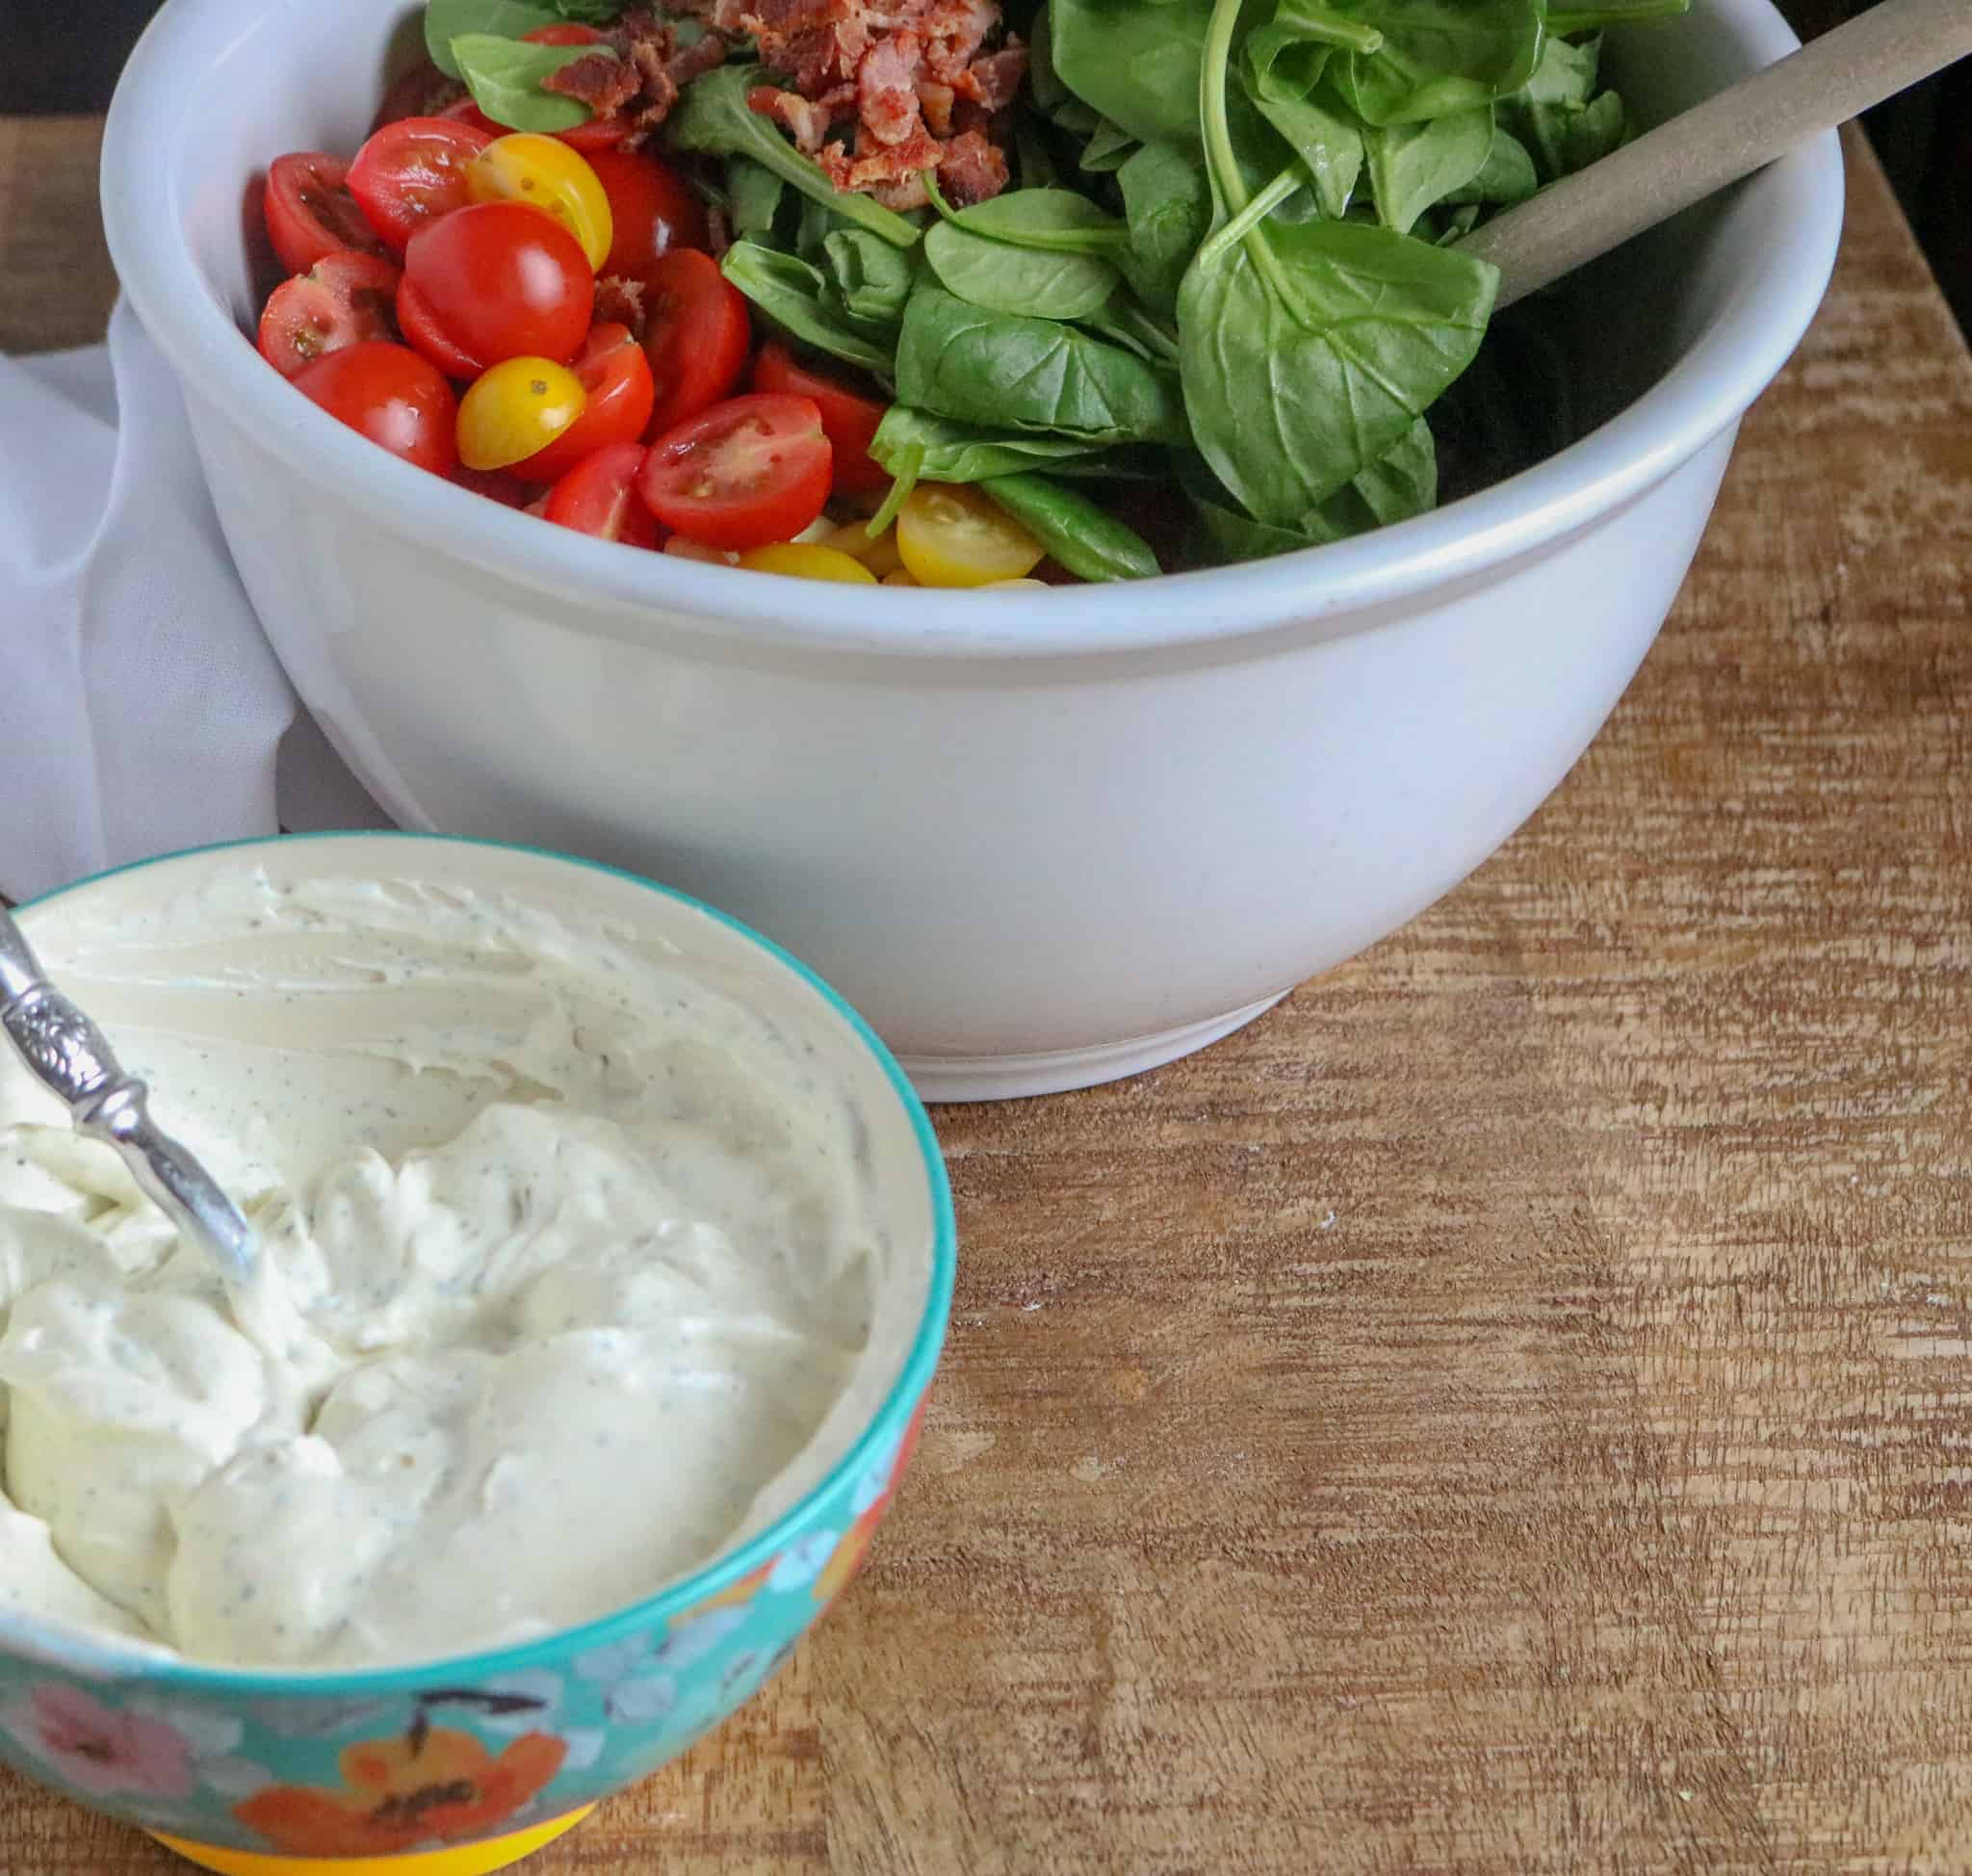 BLT Pasta Salad ingredients in white ceramic bowl in background. Mayonnaise/dressing mix in blue floral bowl in foreground